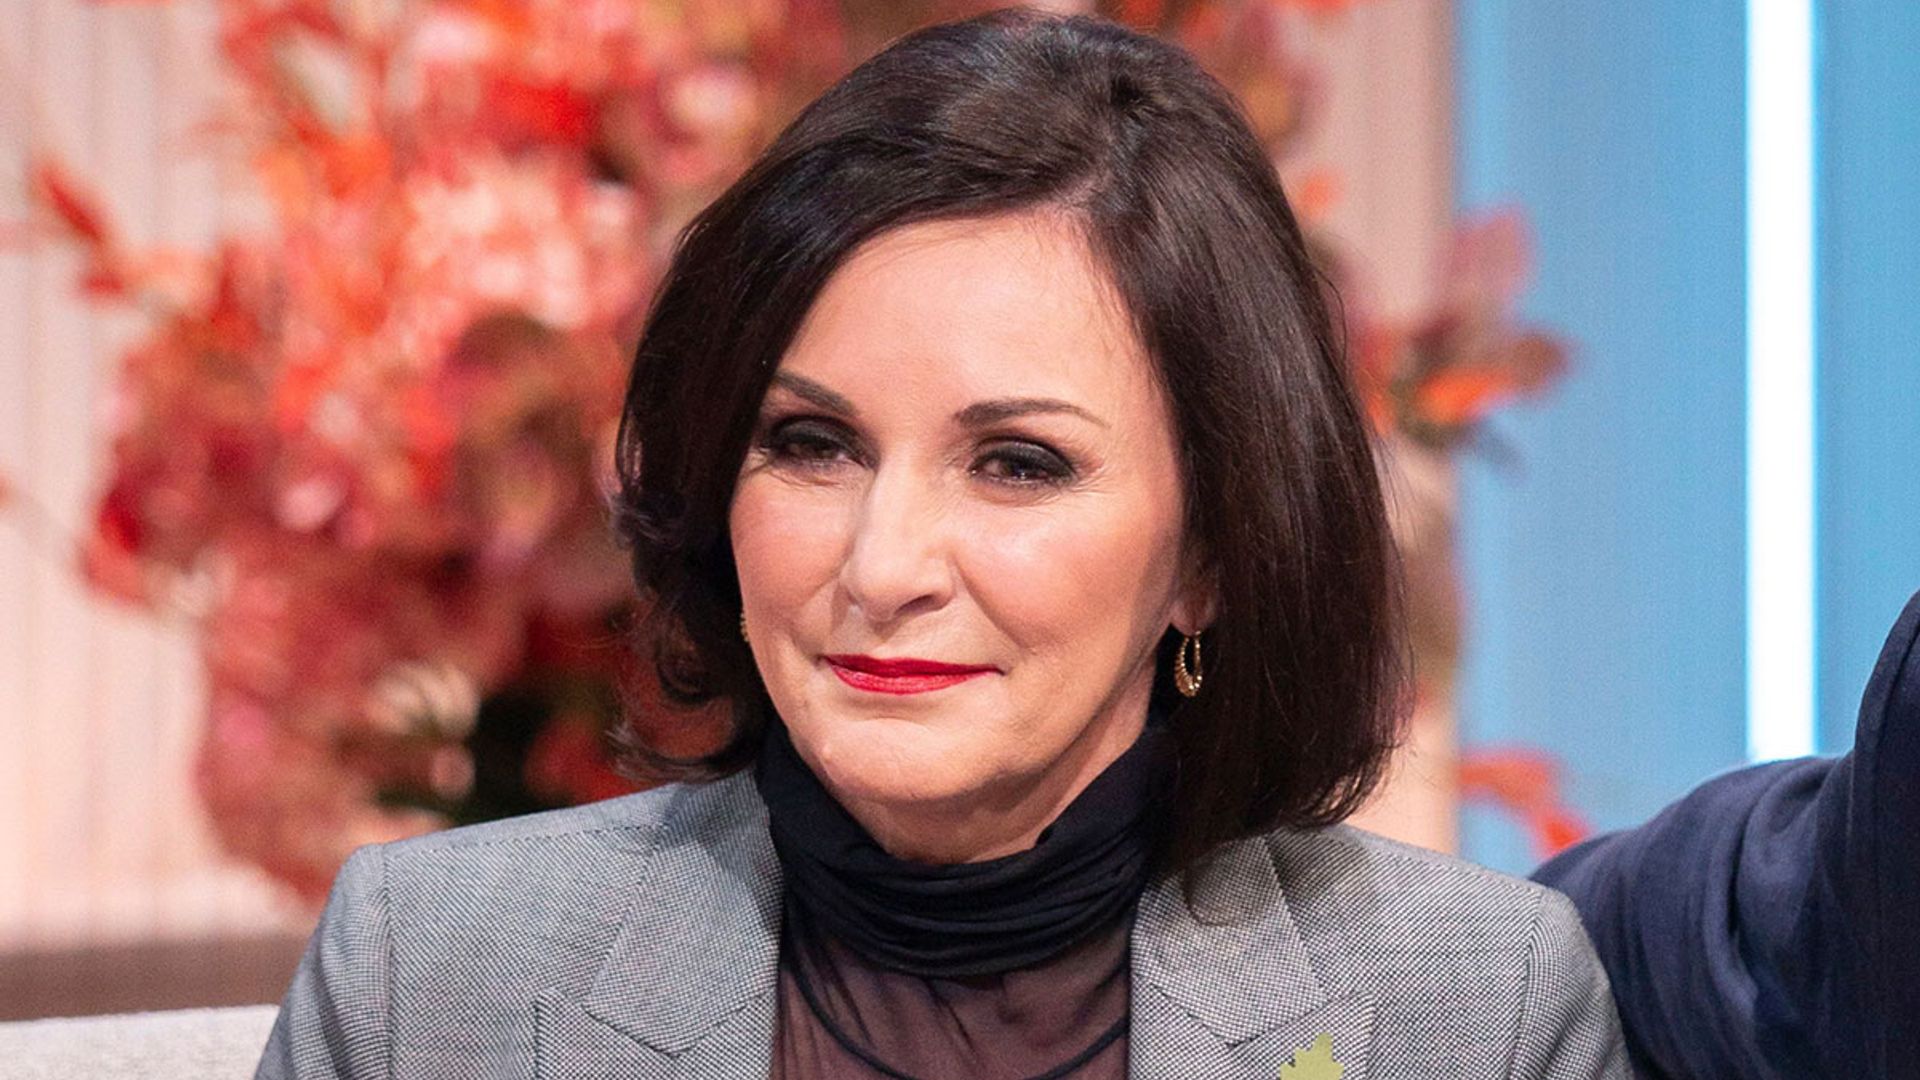 Strictly's Shirley Ballas reveals test results amid 'lump' scare: 'The doctor was alarmed' - HELLO!